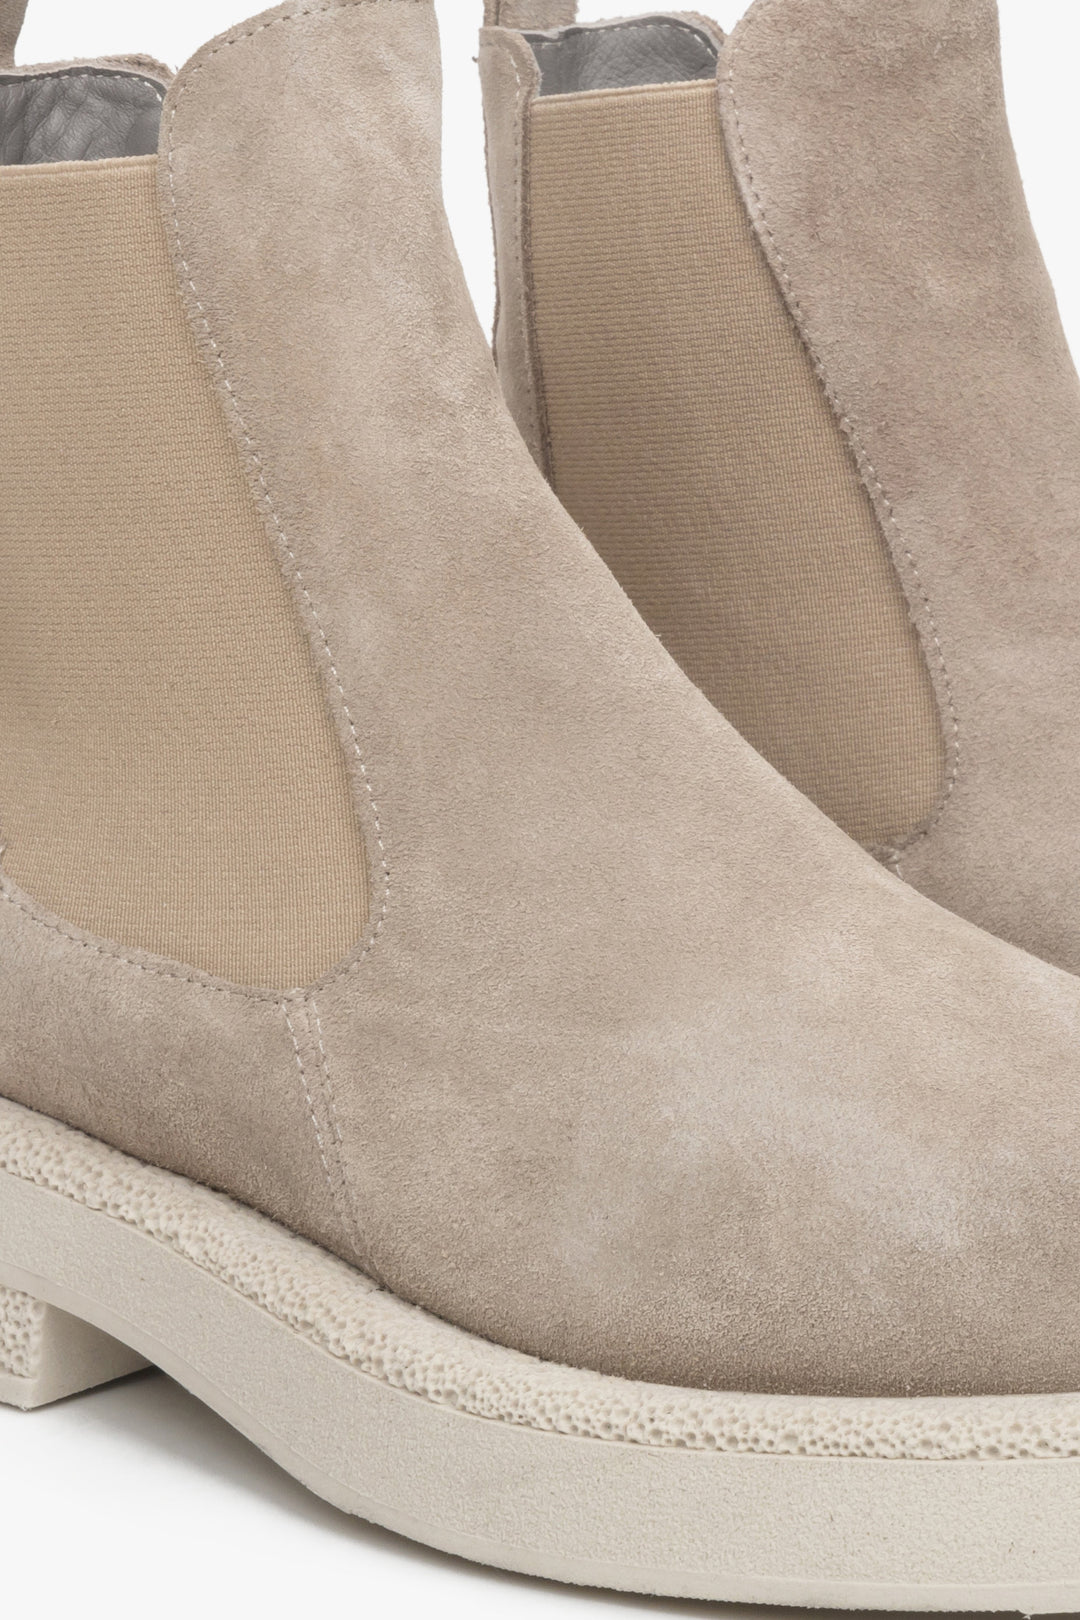 Beige suede women's Chelsea boots - a close-up on details.